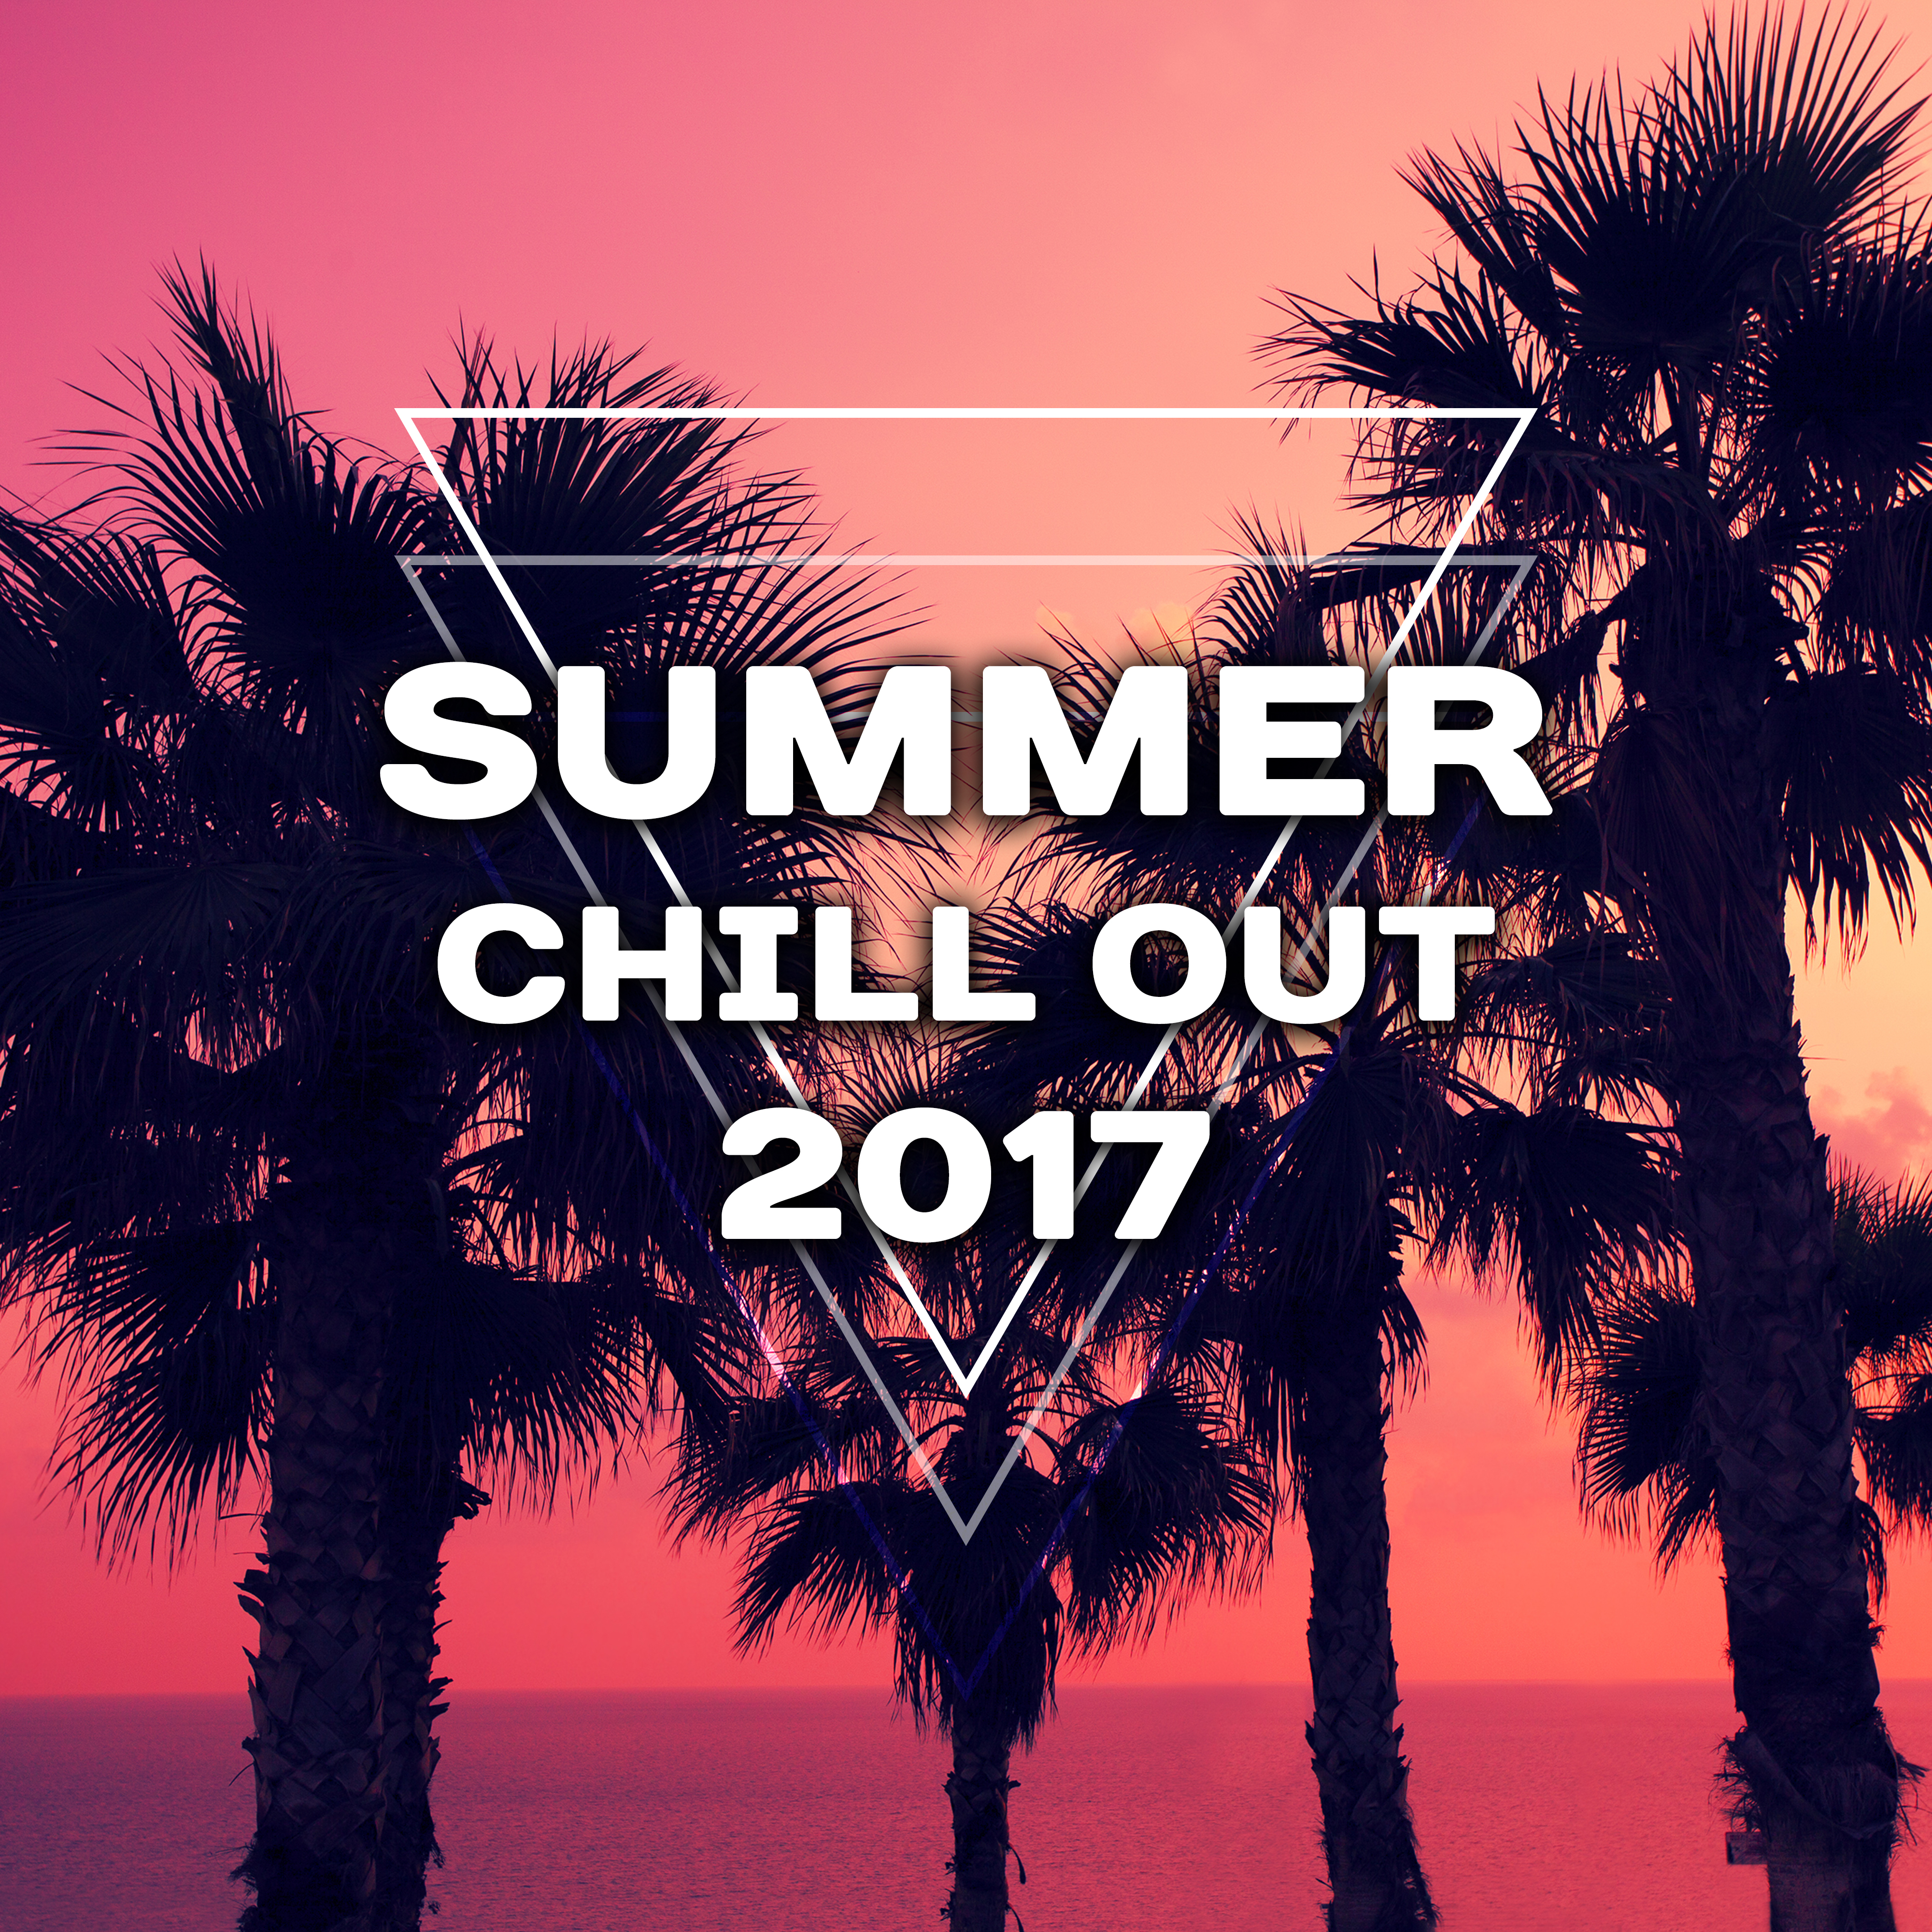 Summer Chill Out 2017 – Deep Chill Out Vibes, Beach Music, Relax, Ibiza Summertime, Electronic Beats, Bar Chill Out, Holiday